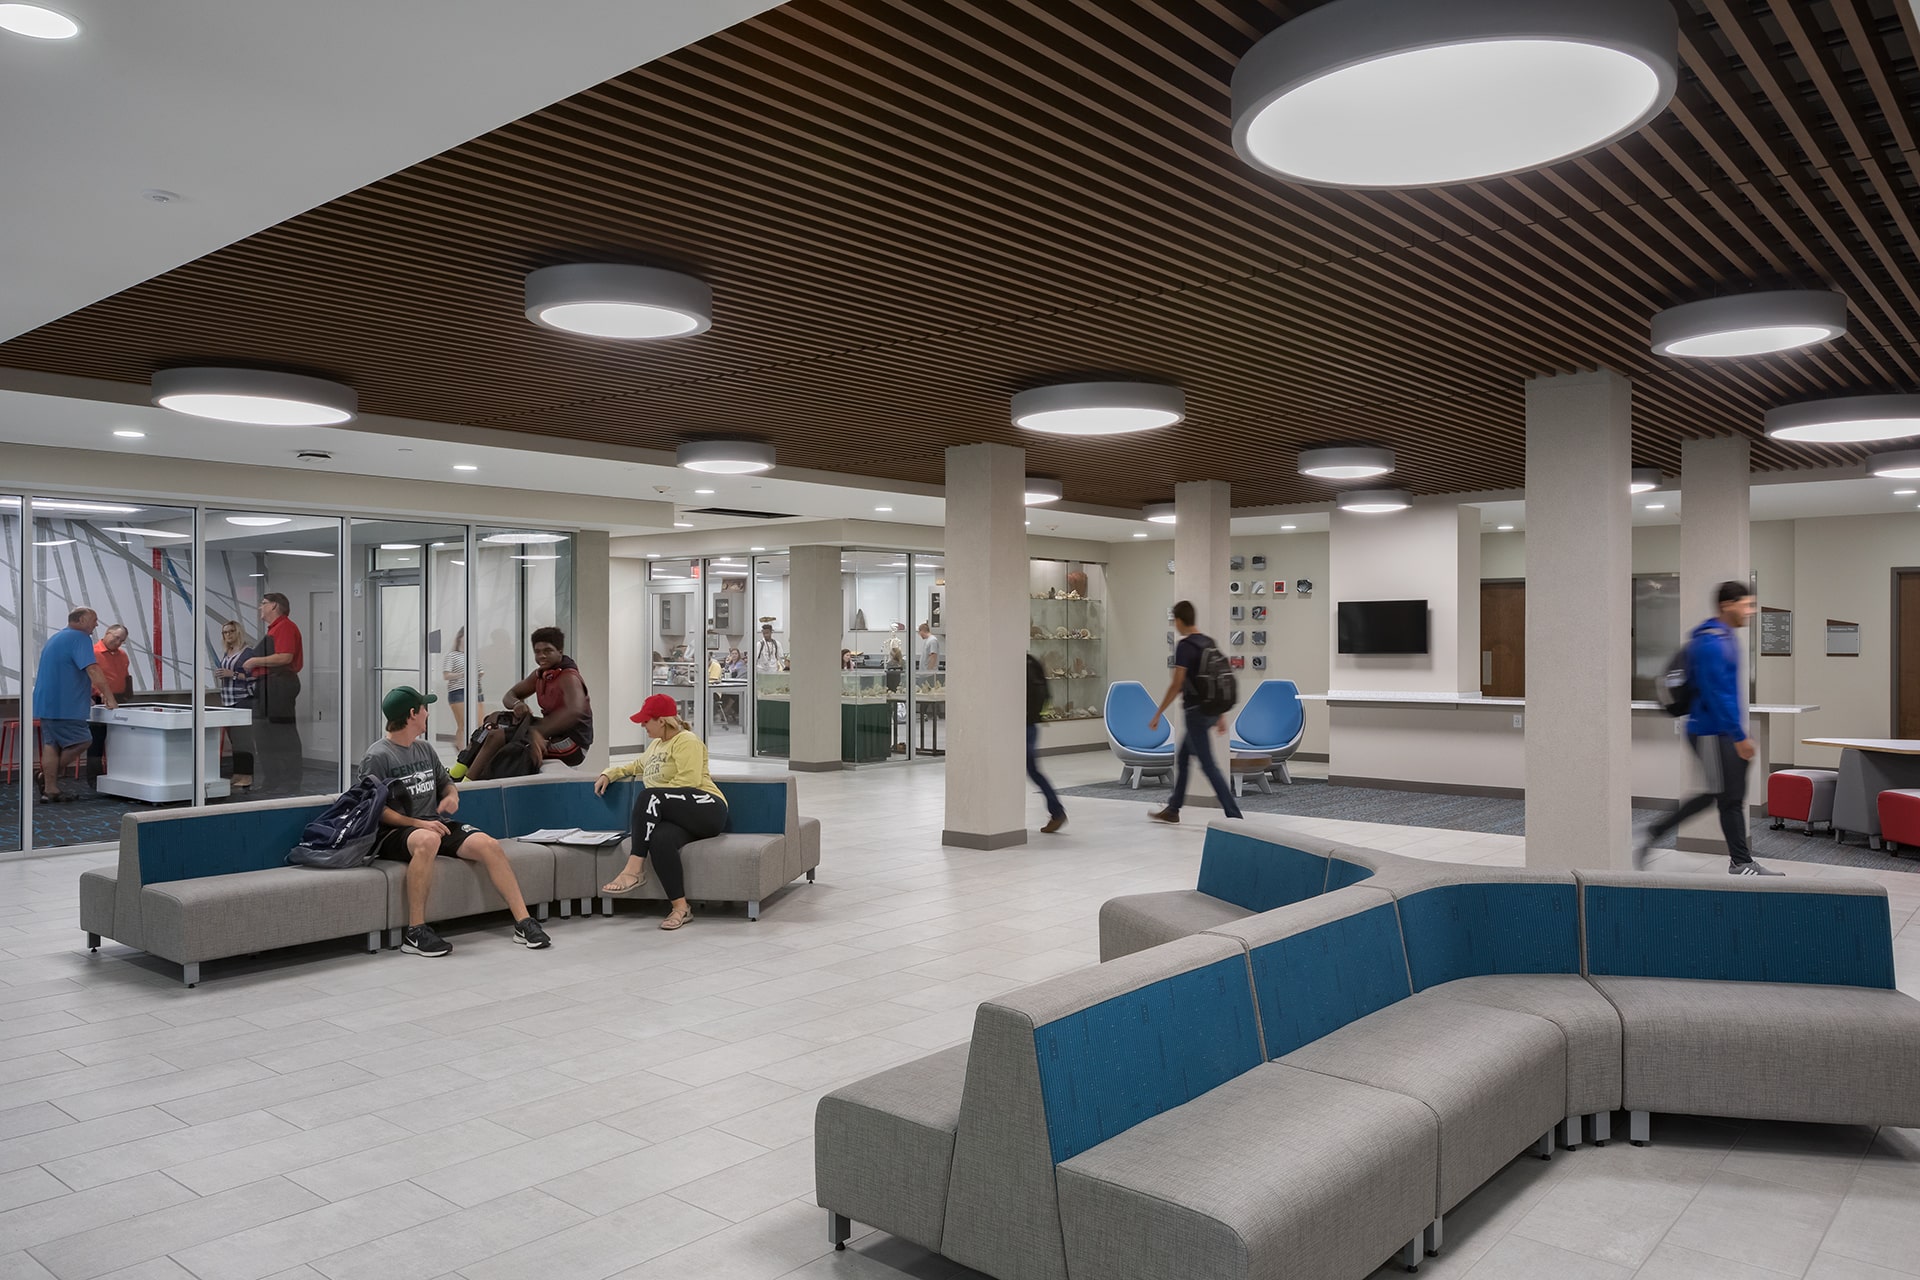 central methodist university science building redesigned by trivers architectural firm